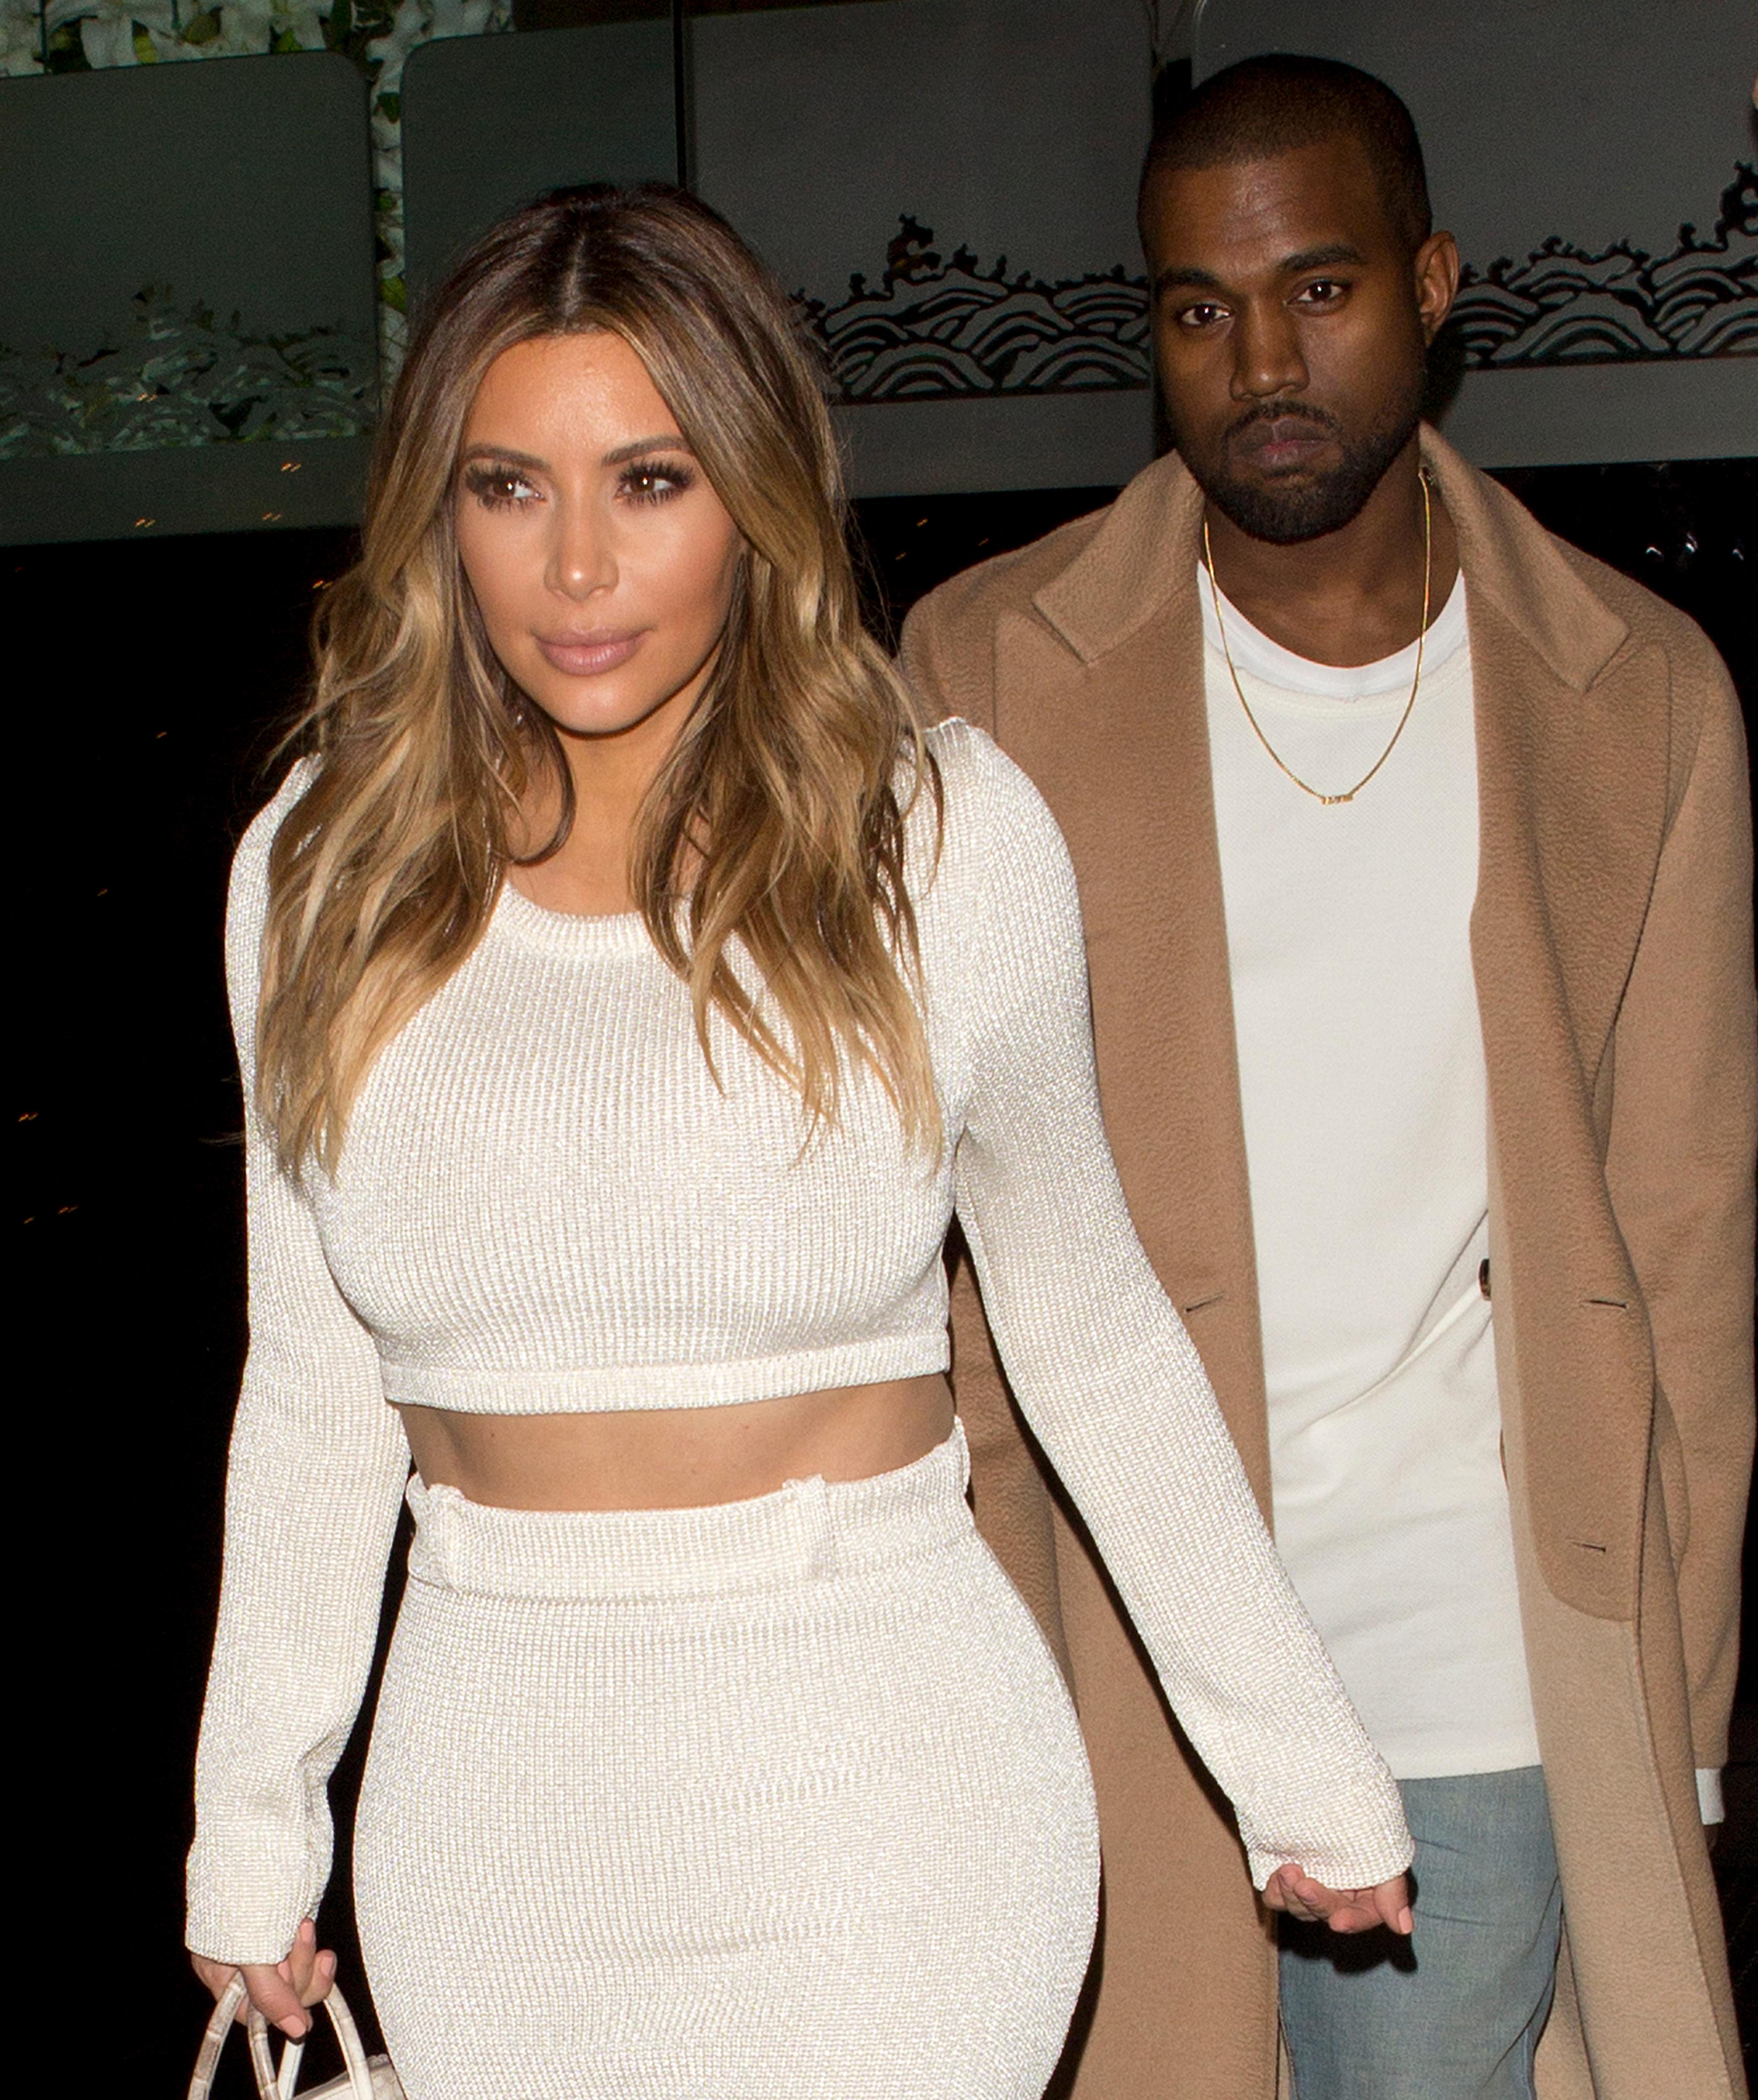 Kim Kardashian and her fiance Kanye West were seen leaving Mr. Chow Restaurant in Beverly Hills, CA